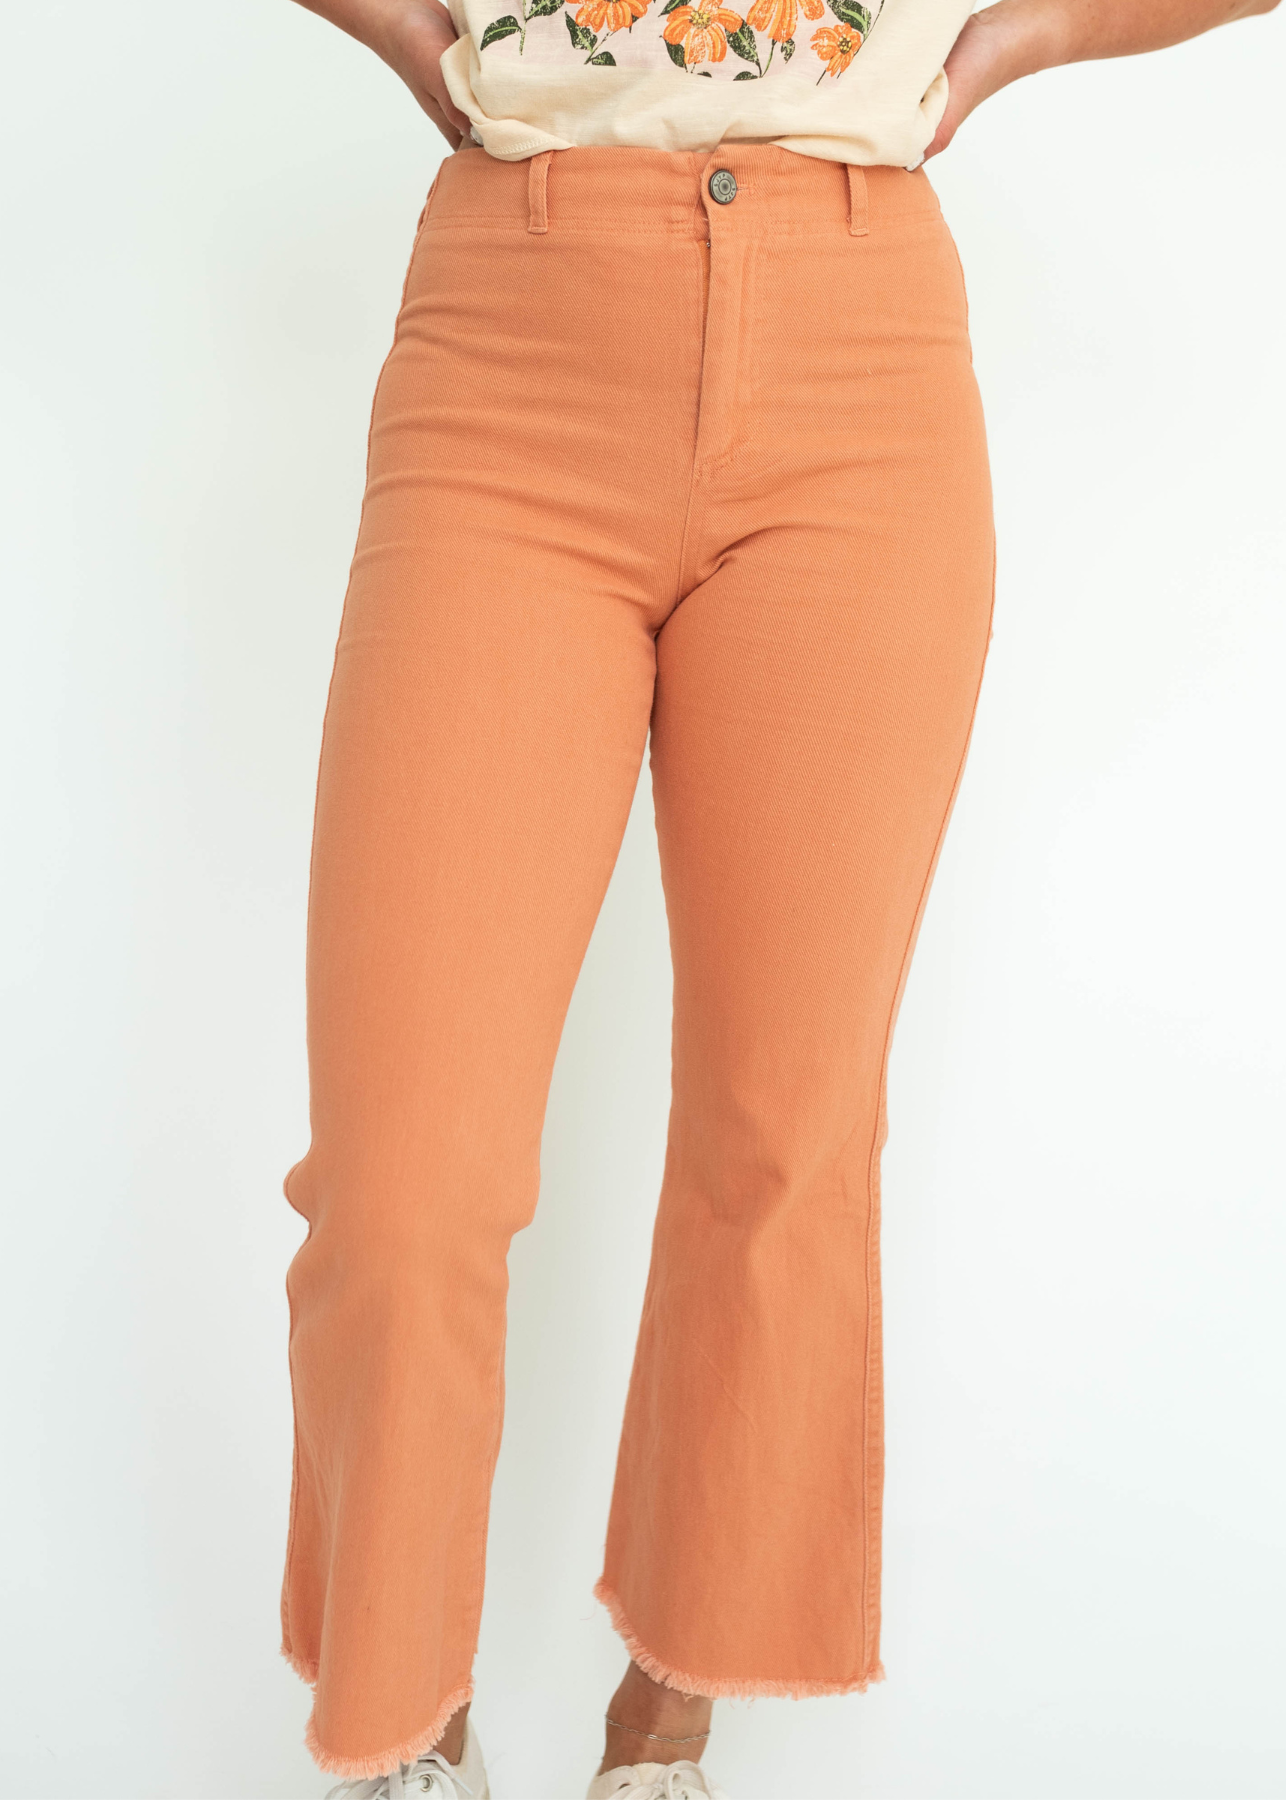 Ginger ankle length pants with a frayed edge.